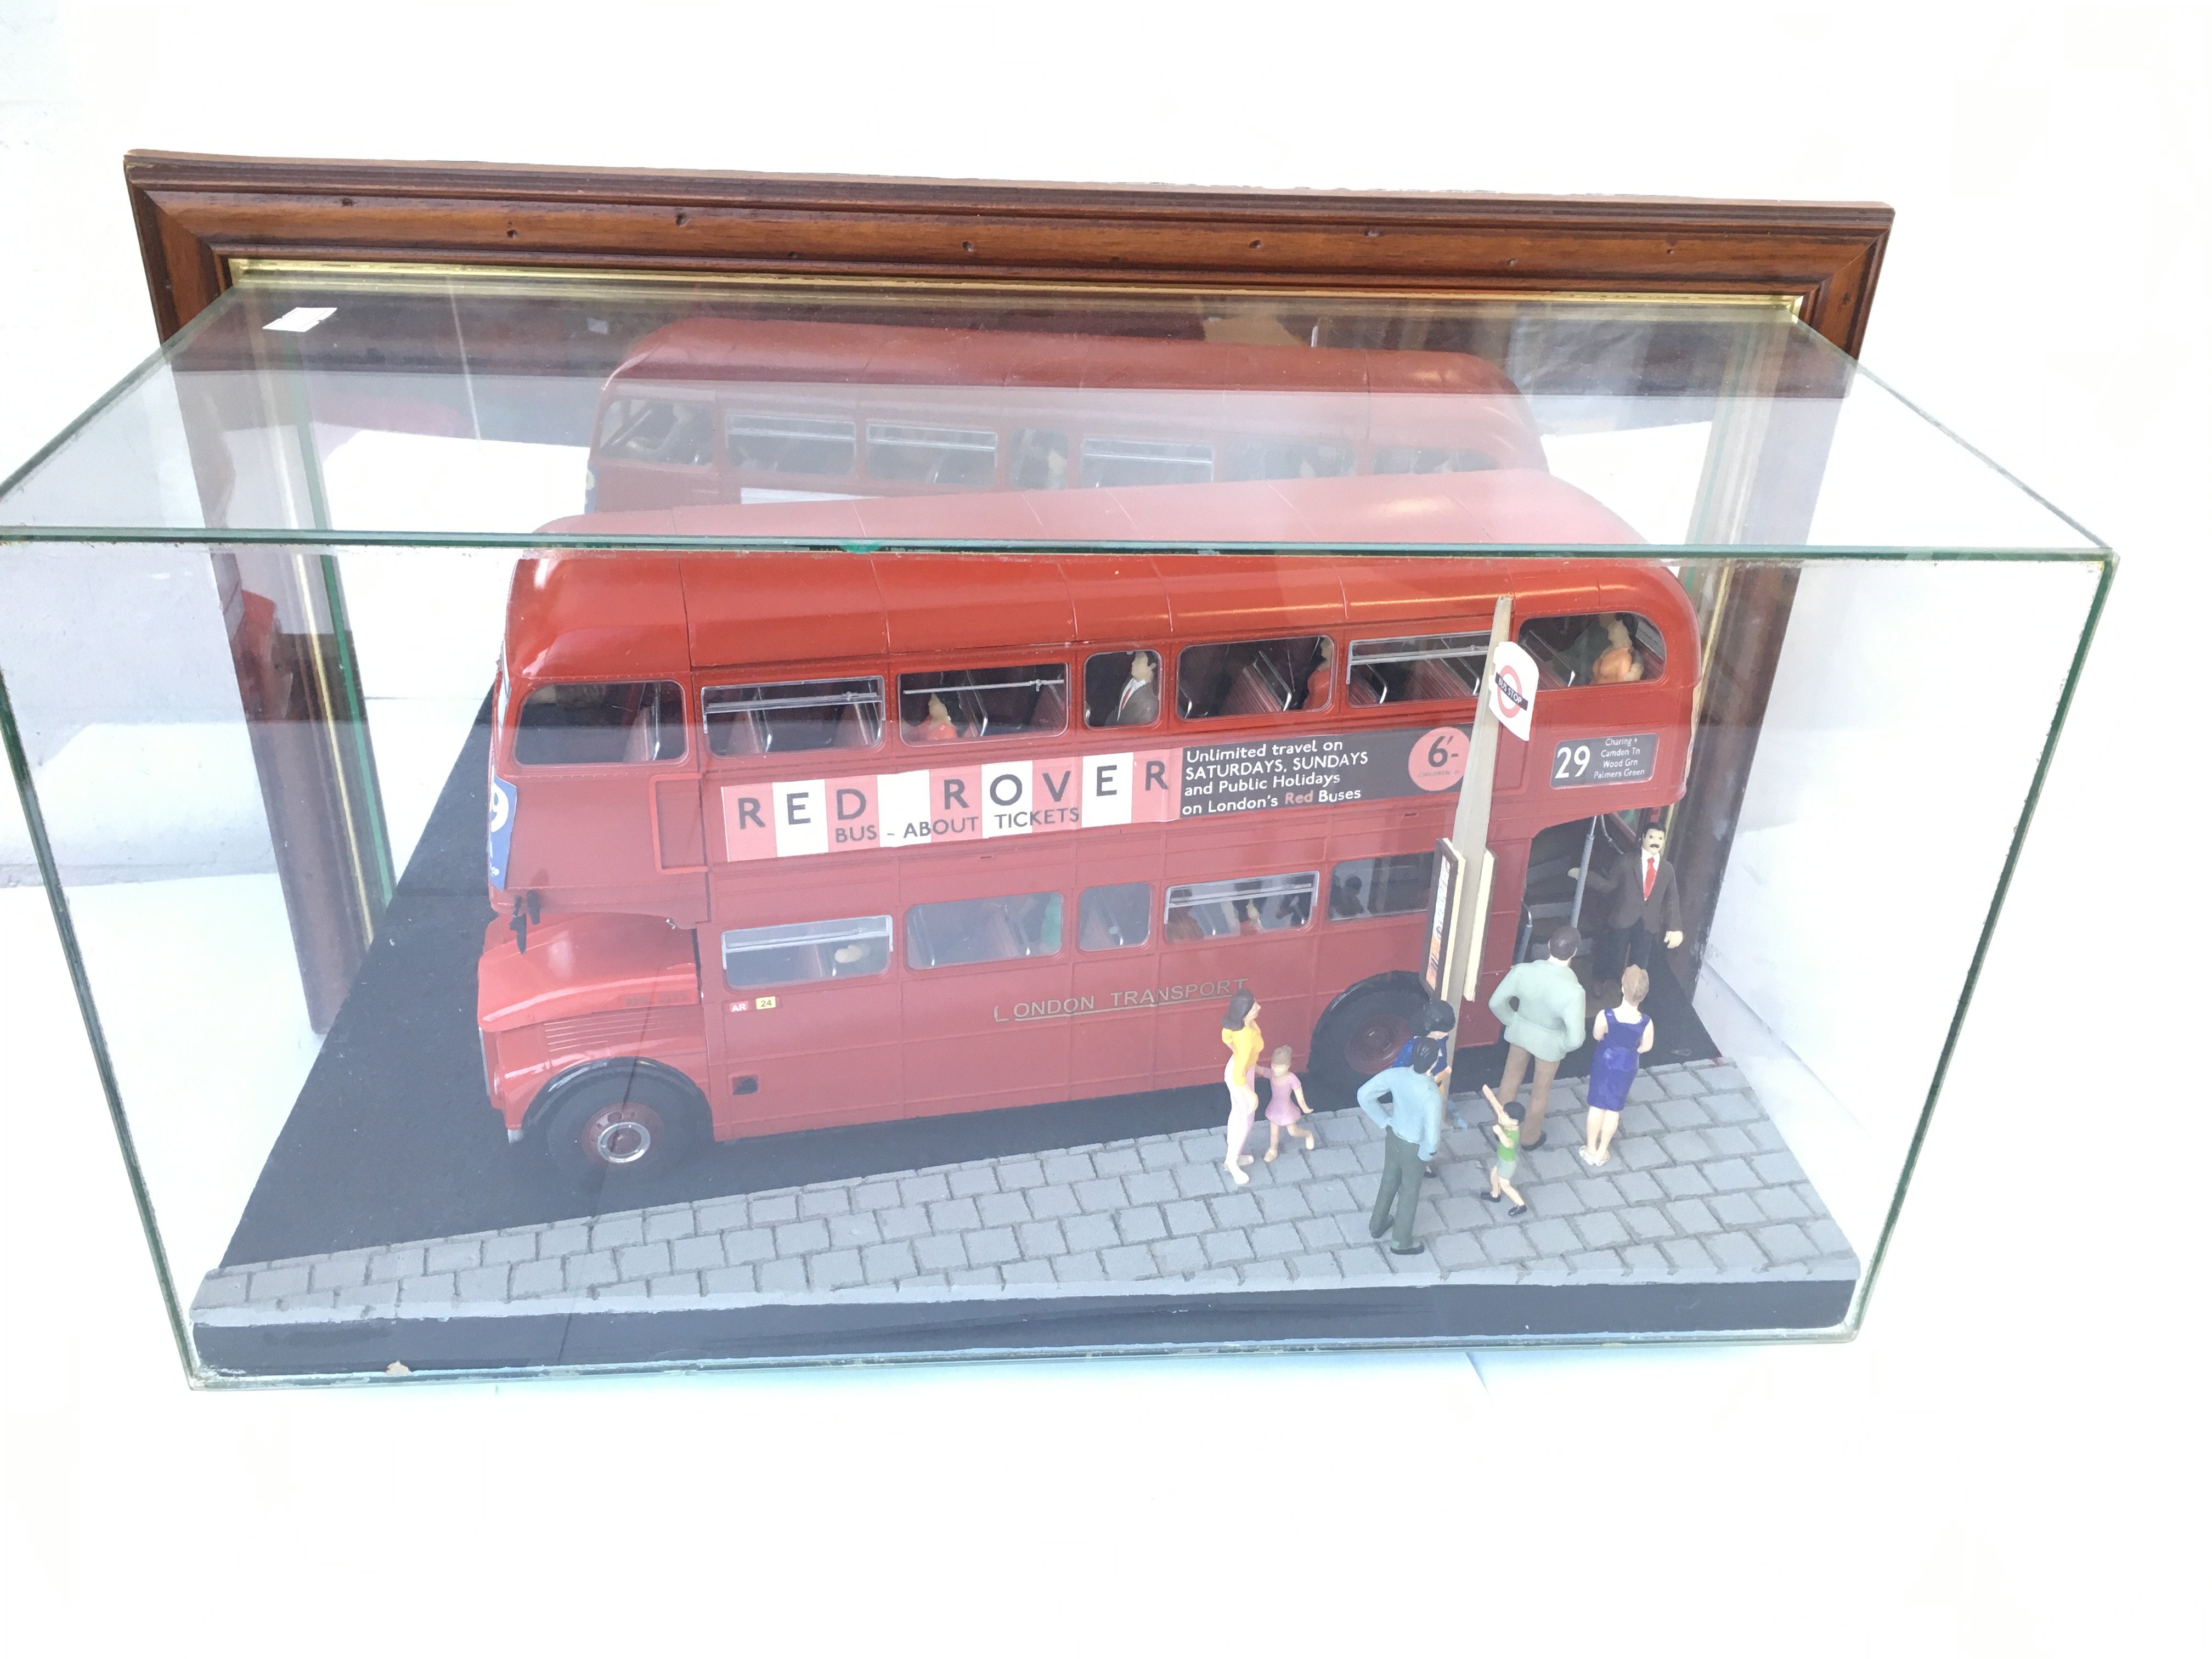 Revell model kit of London route master in wall mo